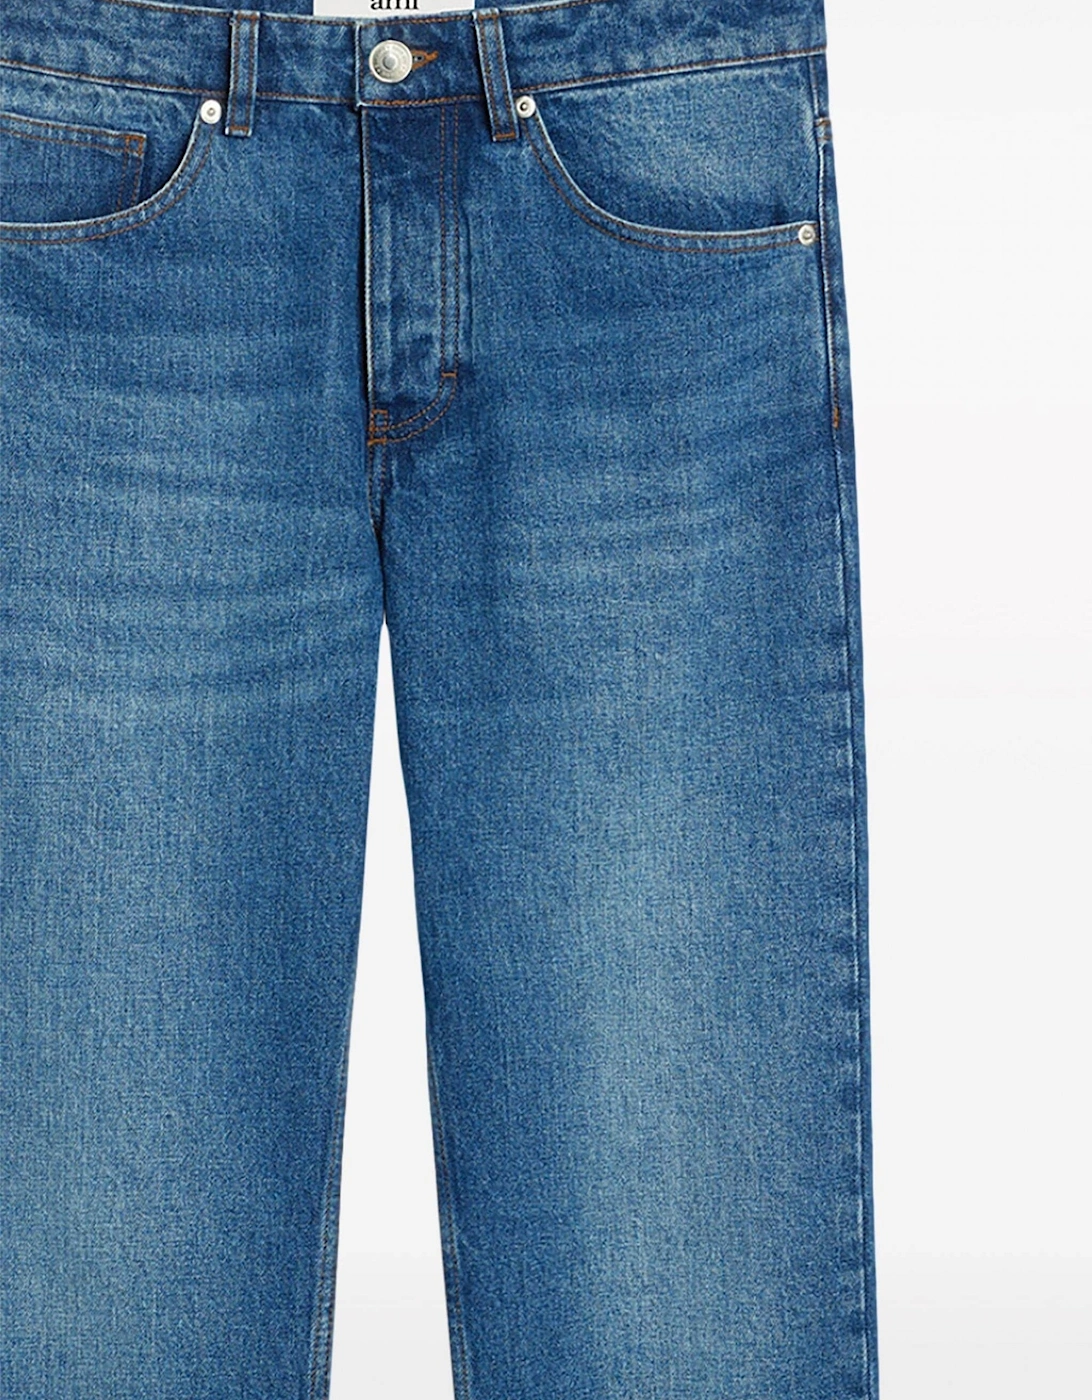 Classic Fit Washed Denim Jeans